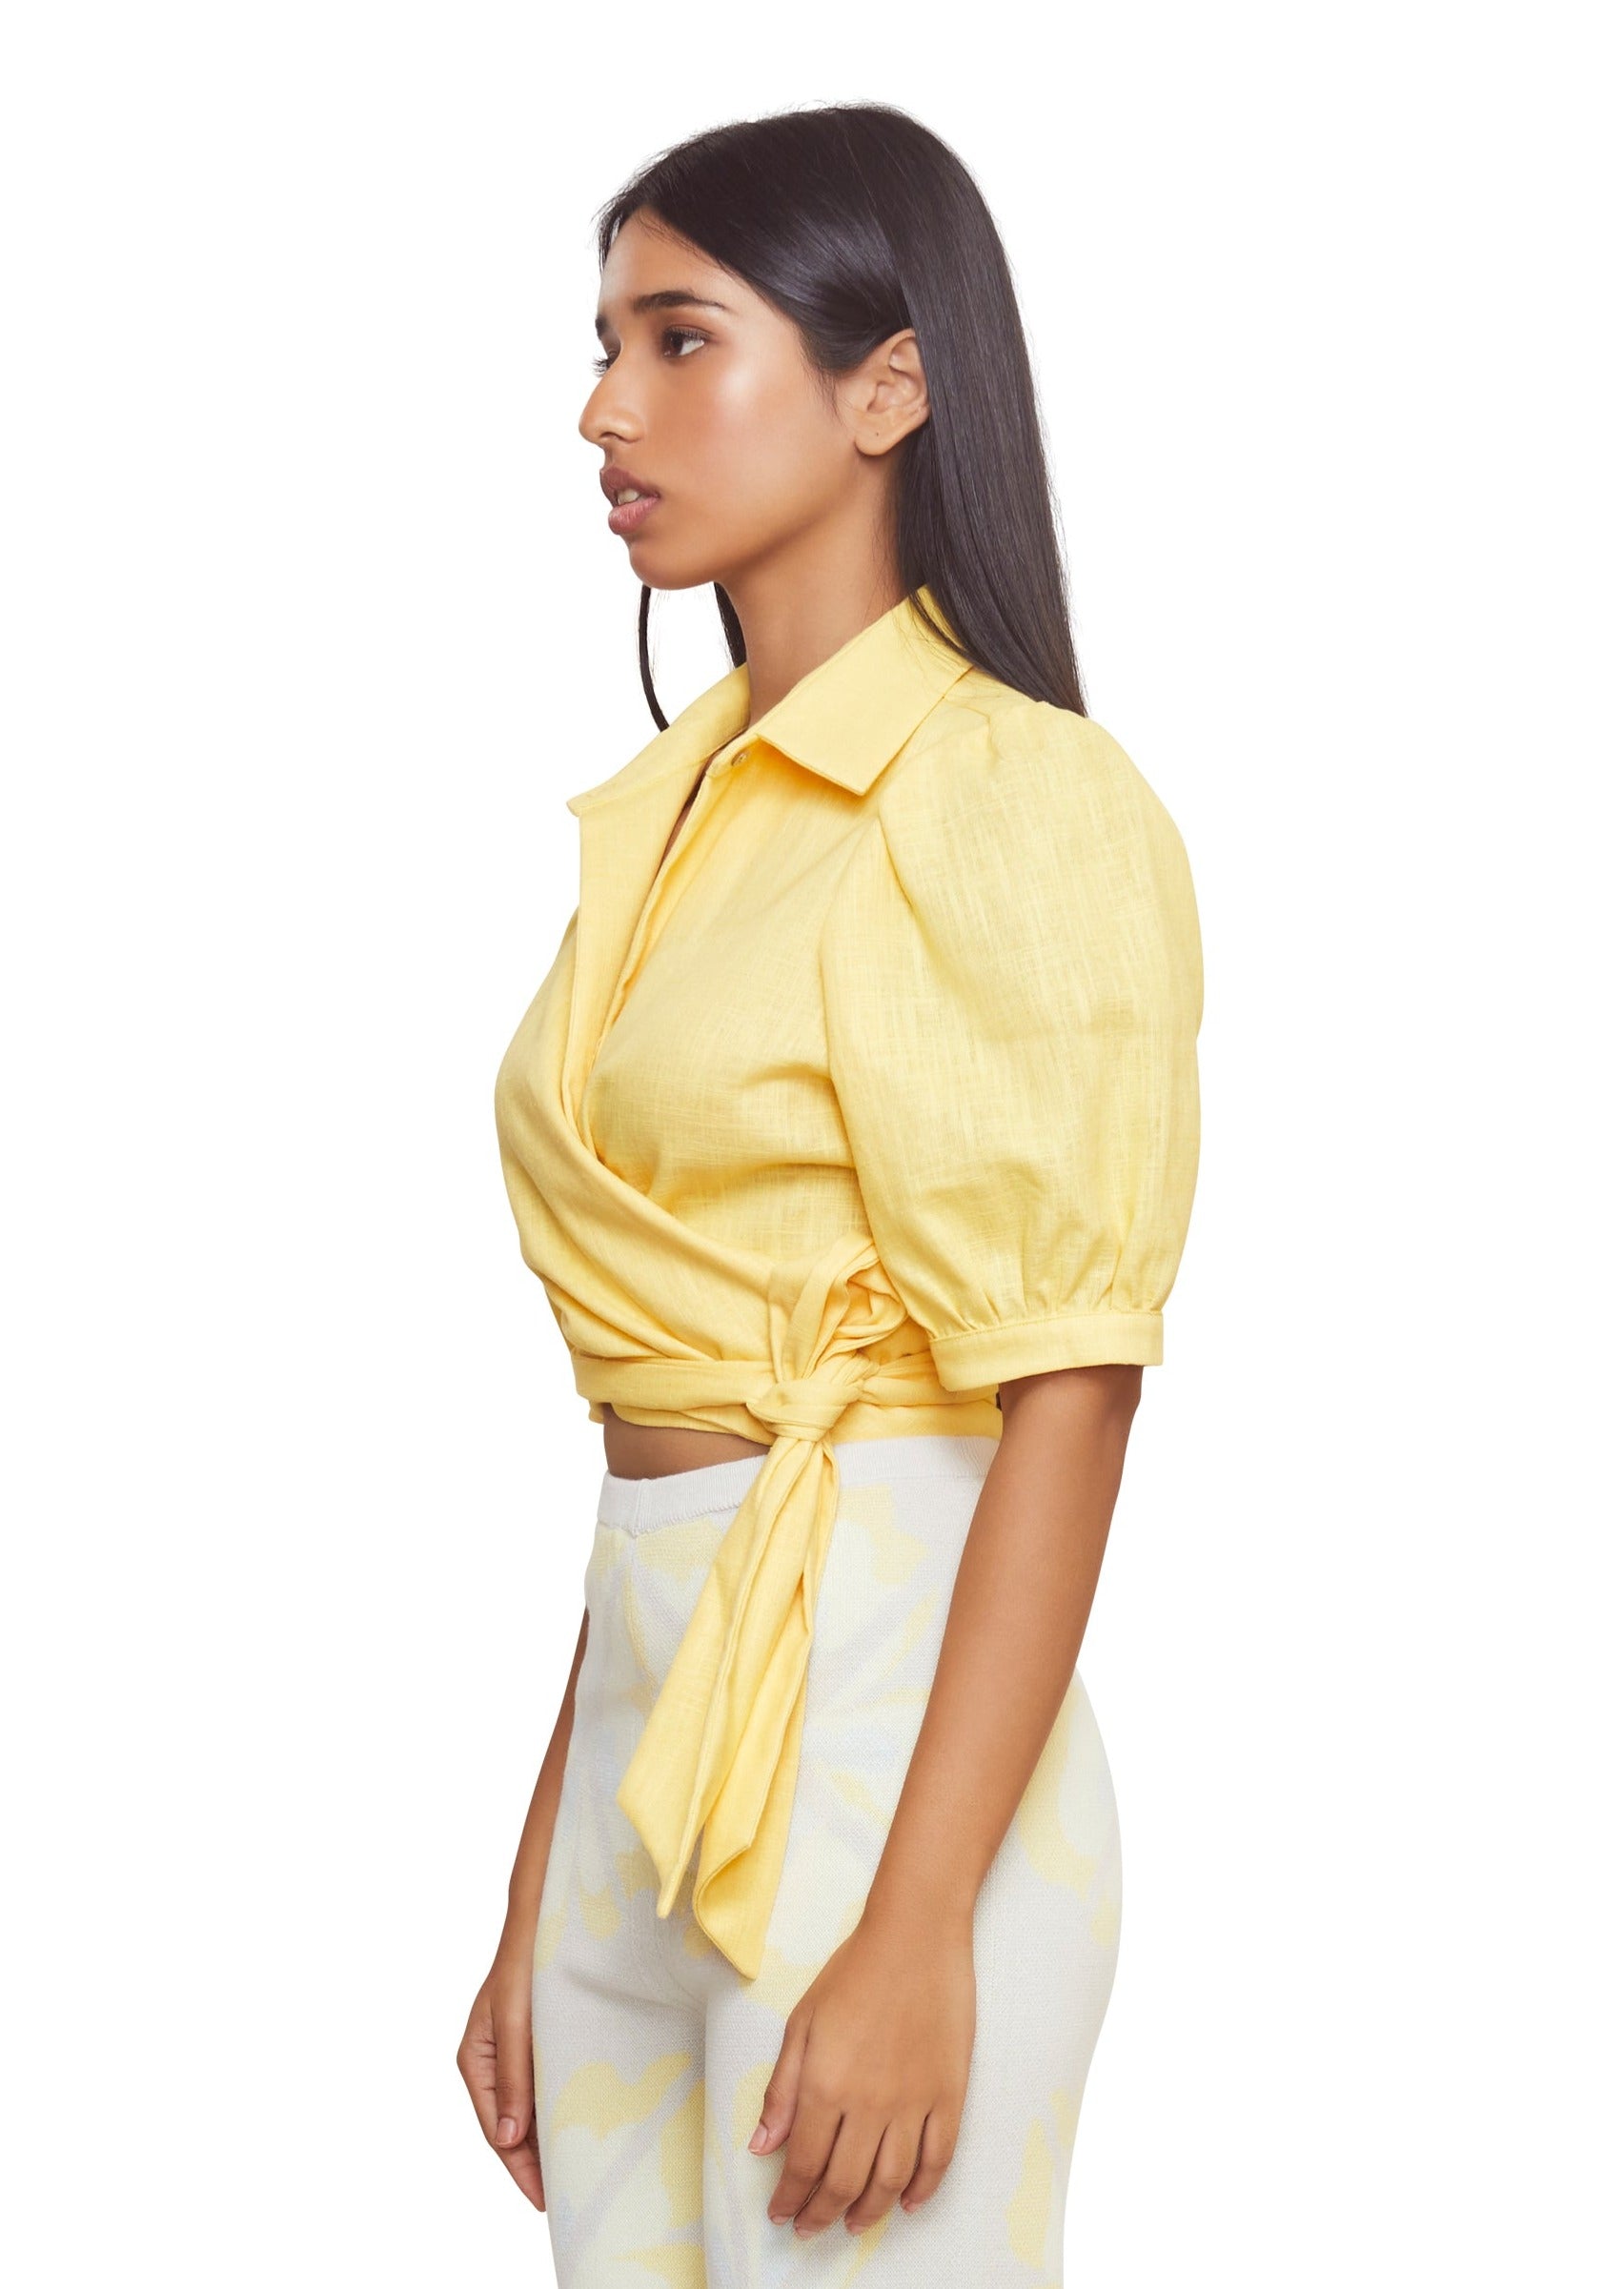 Mix up your classic shirt by making it yellow, linen and tied at the waist with low shoulders and mid-length puffy sleeves from the brand Musier